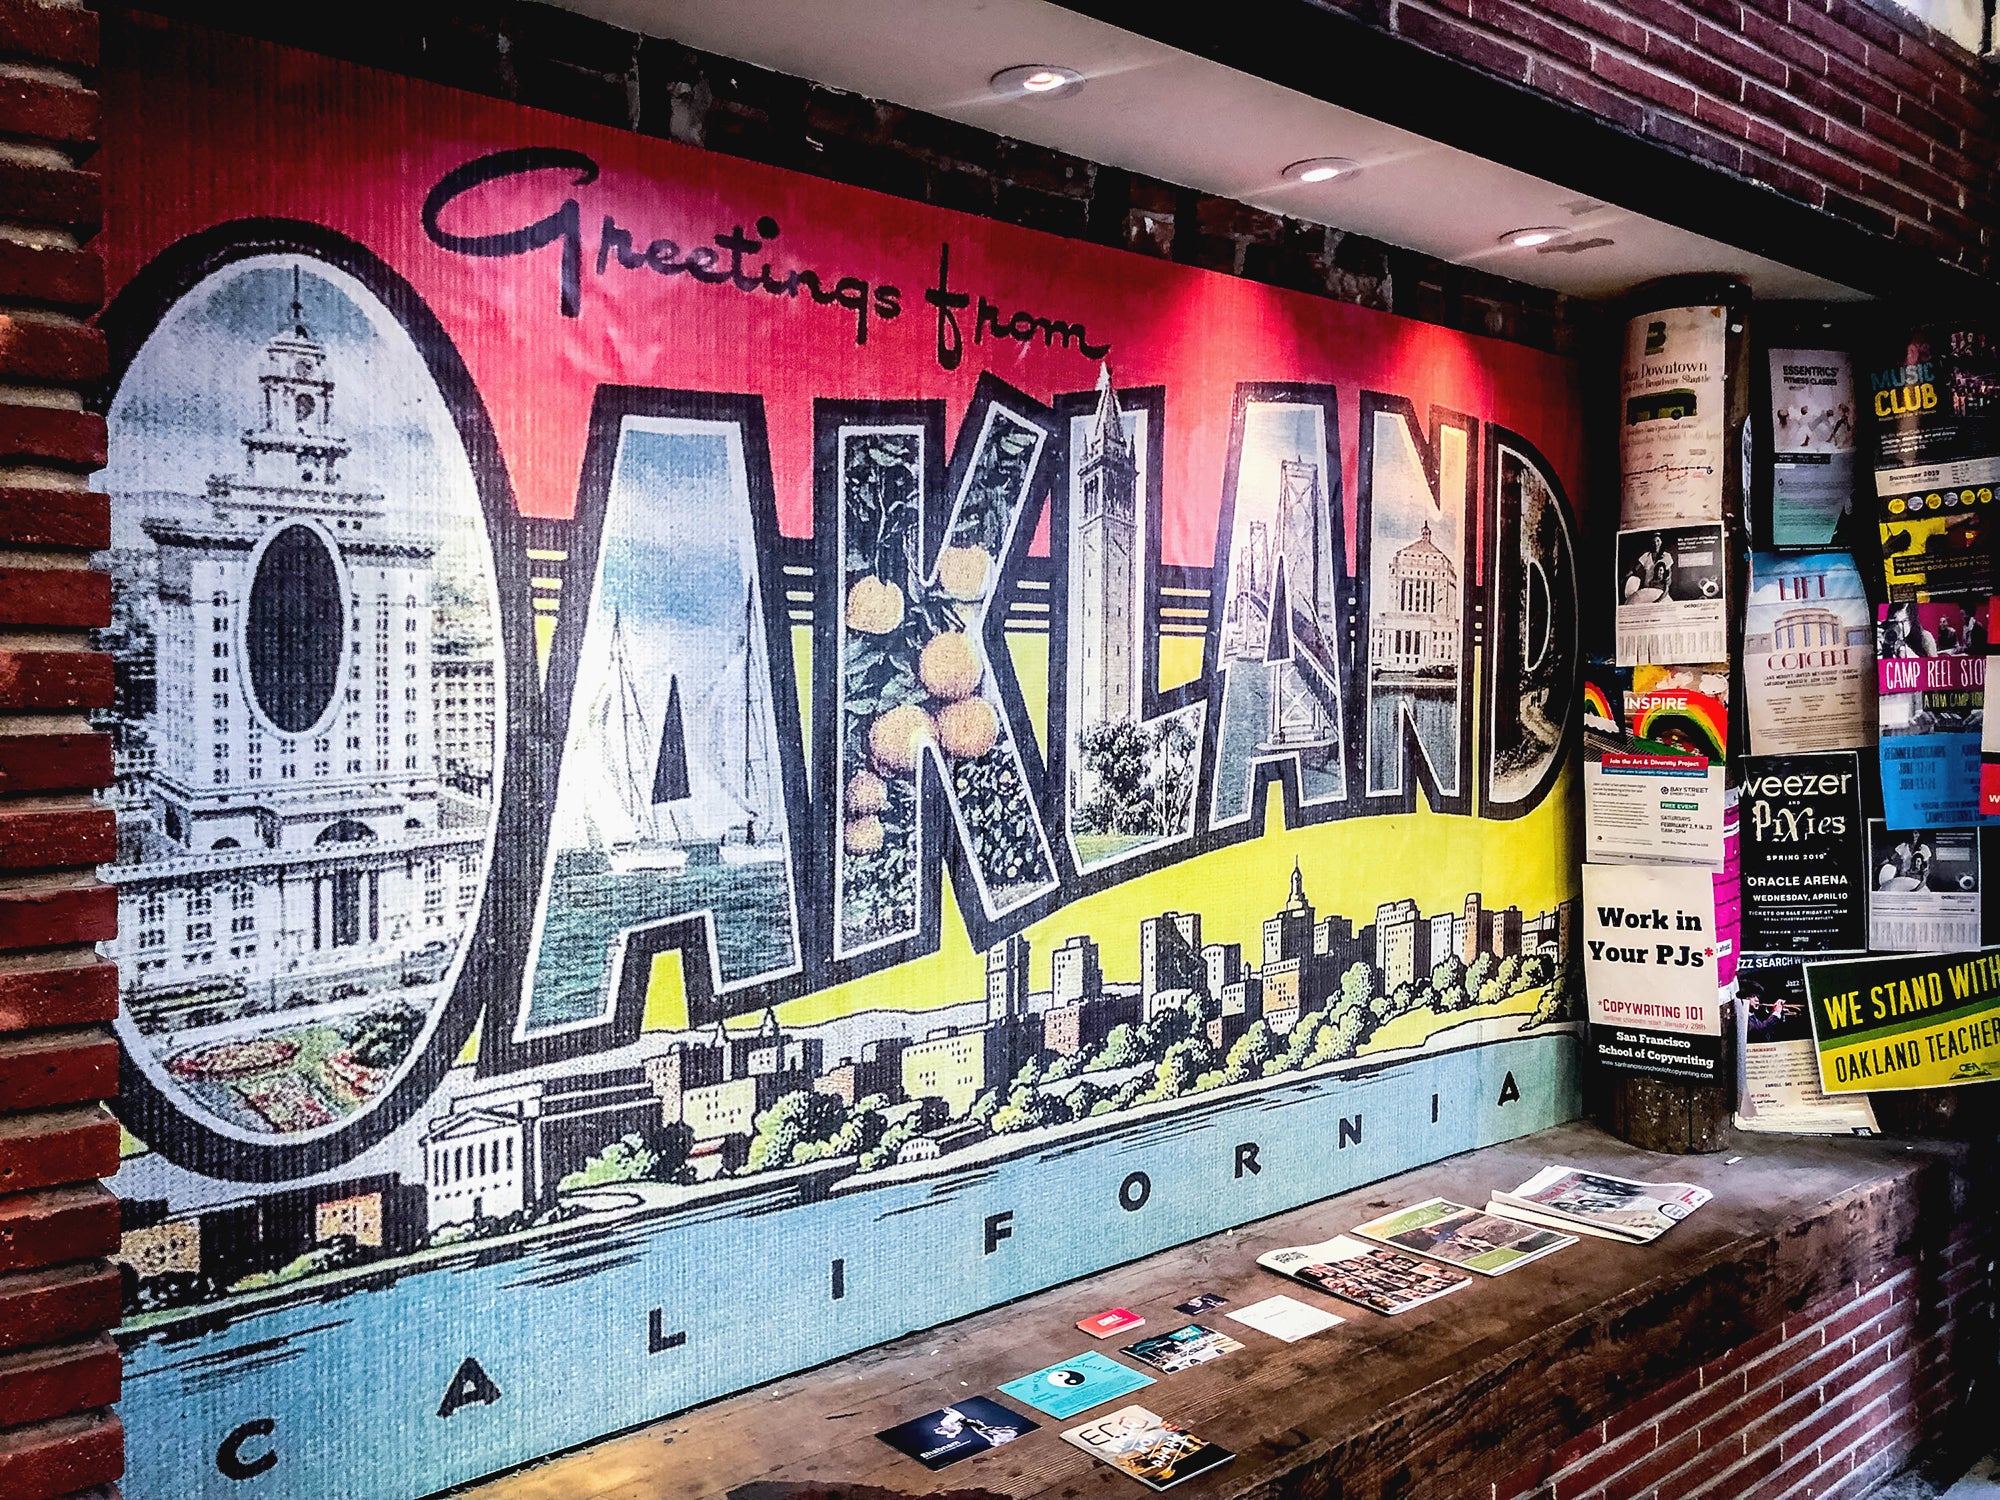 Inset at the flagship store with a vintage postcard style rendering of Greetings from Oakland design featuring iconic imagery inside the letters in OAKLAND and a lakeside skyline in red, yellow, and blue.